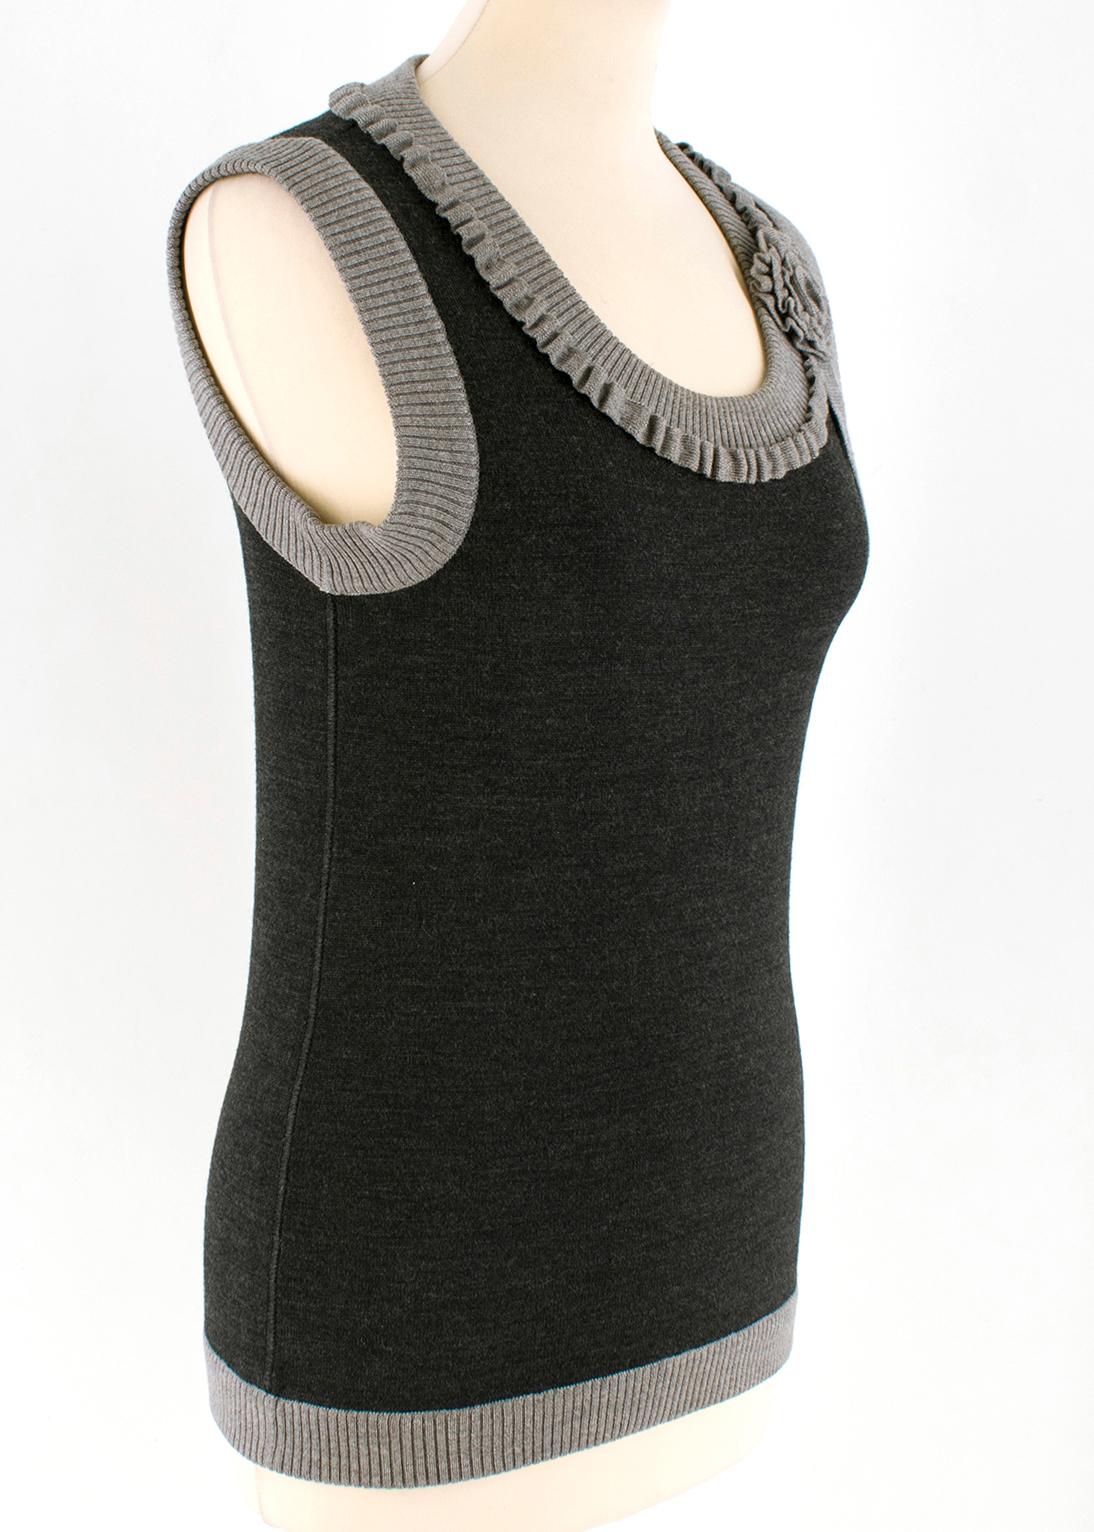 Oscar de la Renta Grey Wool Sleeveless Knit Top

- wool knit top
- sleeveless
- round neckline
- light grey rib trim
- knit flower embellishment to the collar

Please note, these items are pre-owned and may show some signs of storage, even when